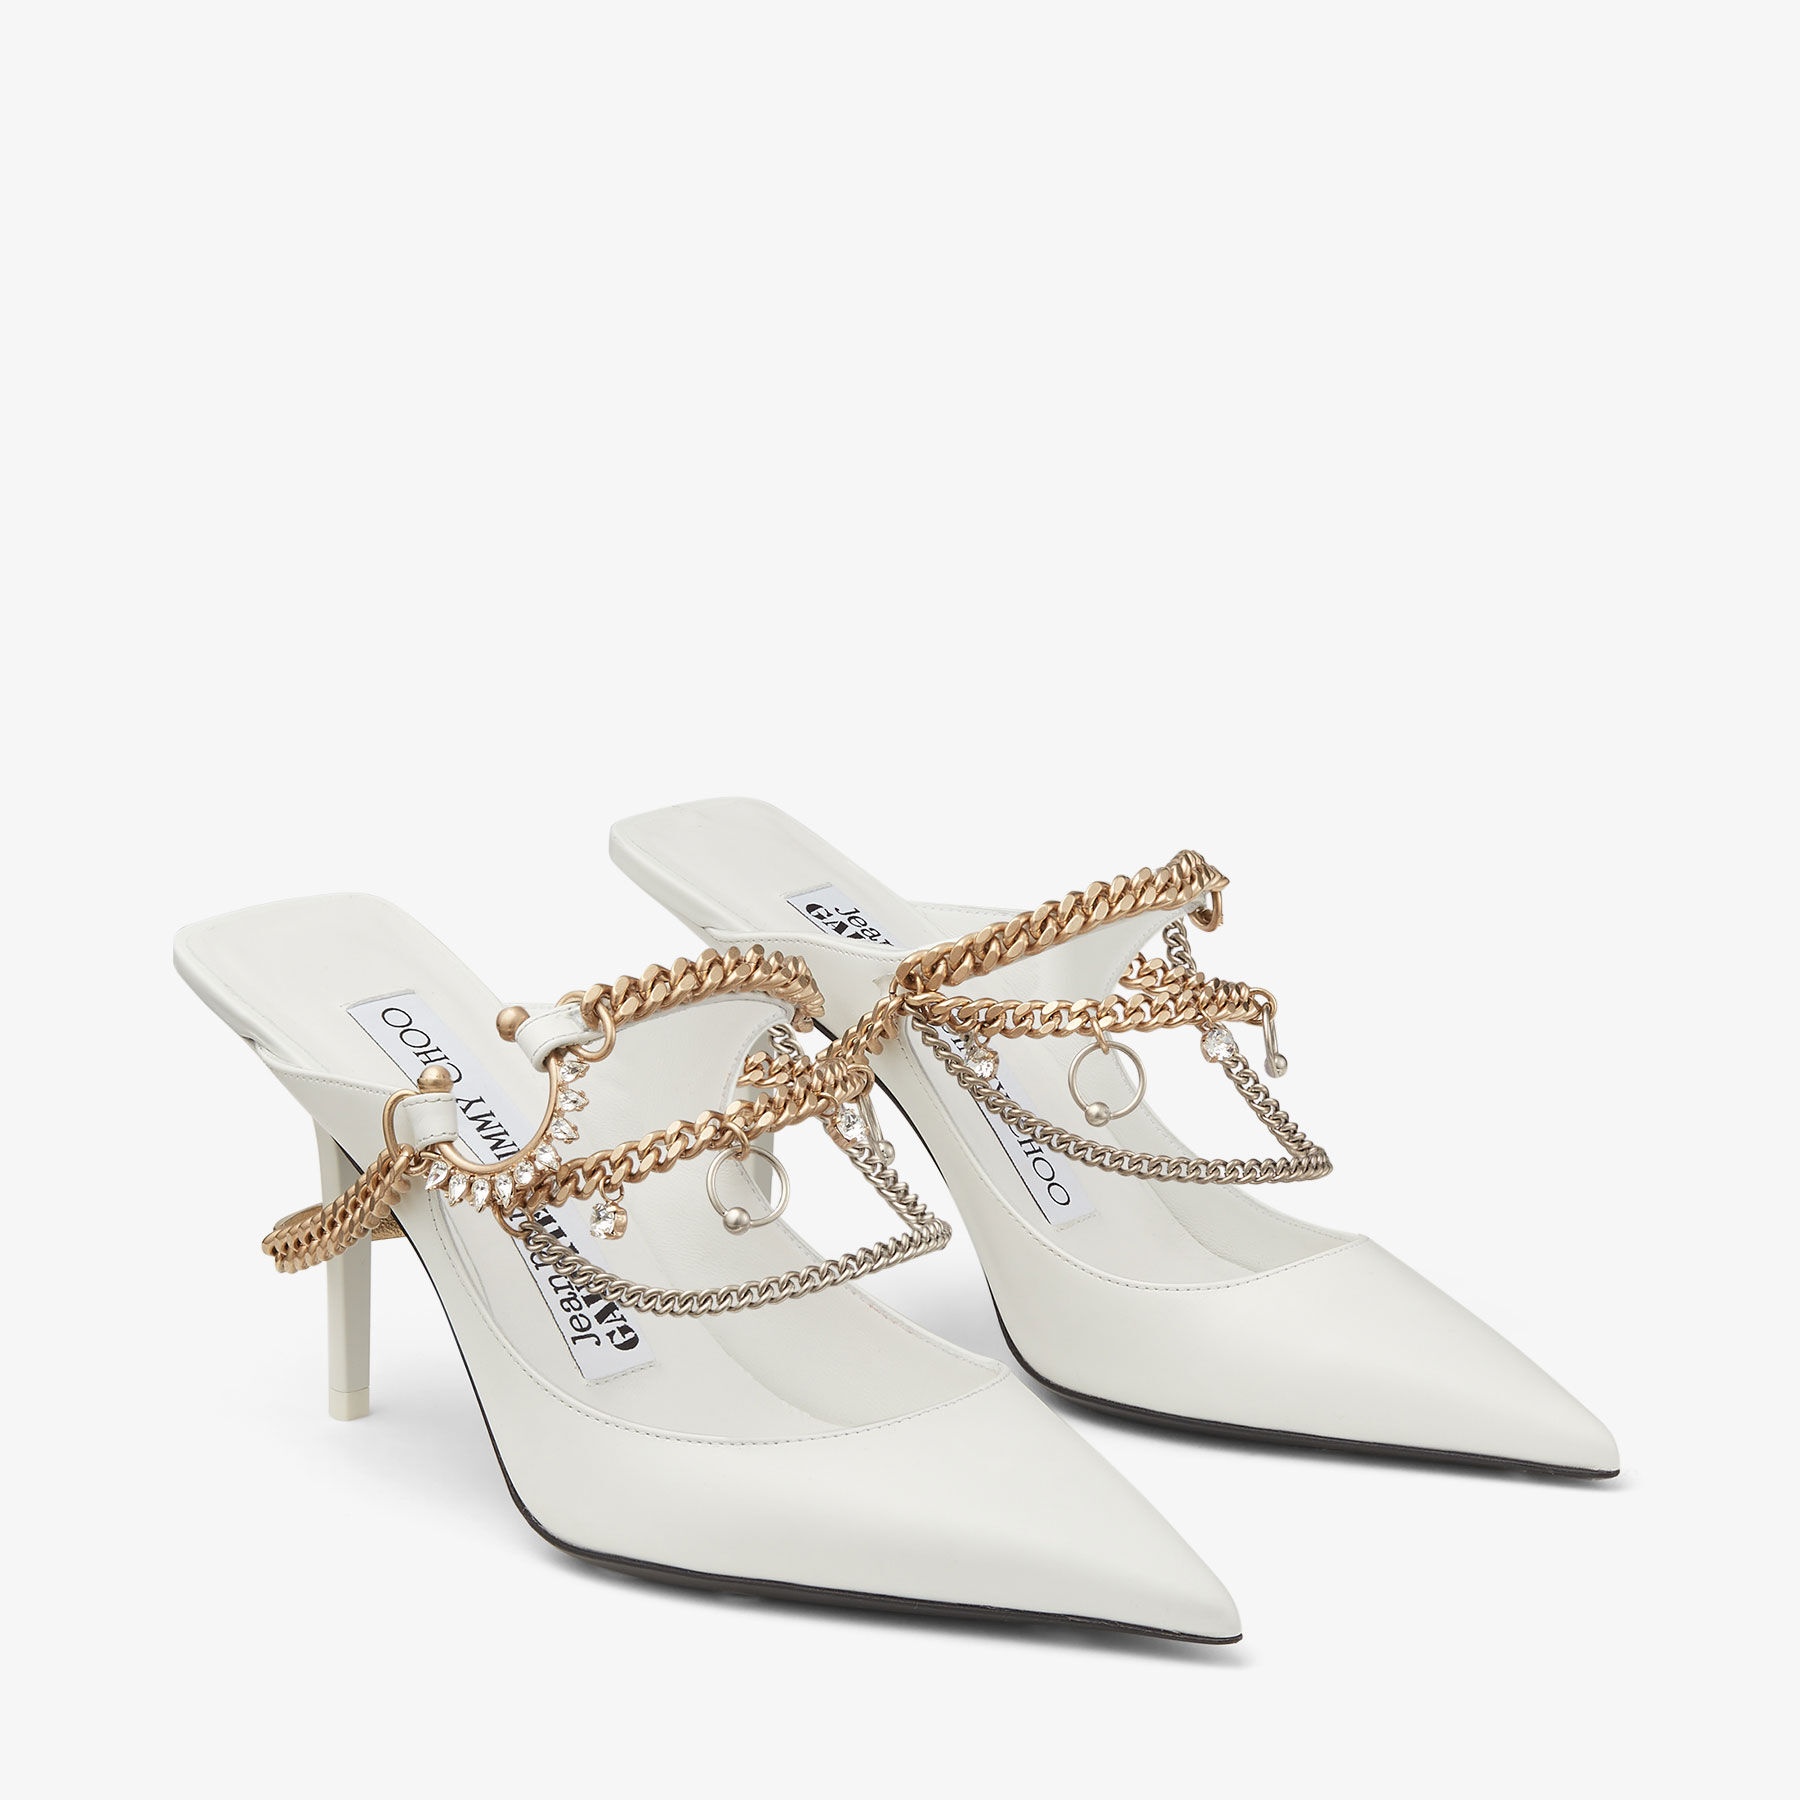 Jimmy Choo / Jean Paul Gaultier Bing 90
Optical White Calf Leather Mules with Jewellery - 3